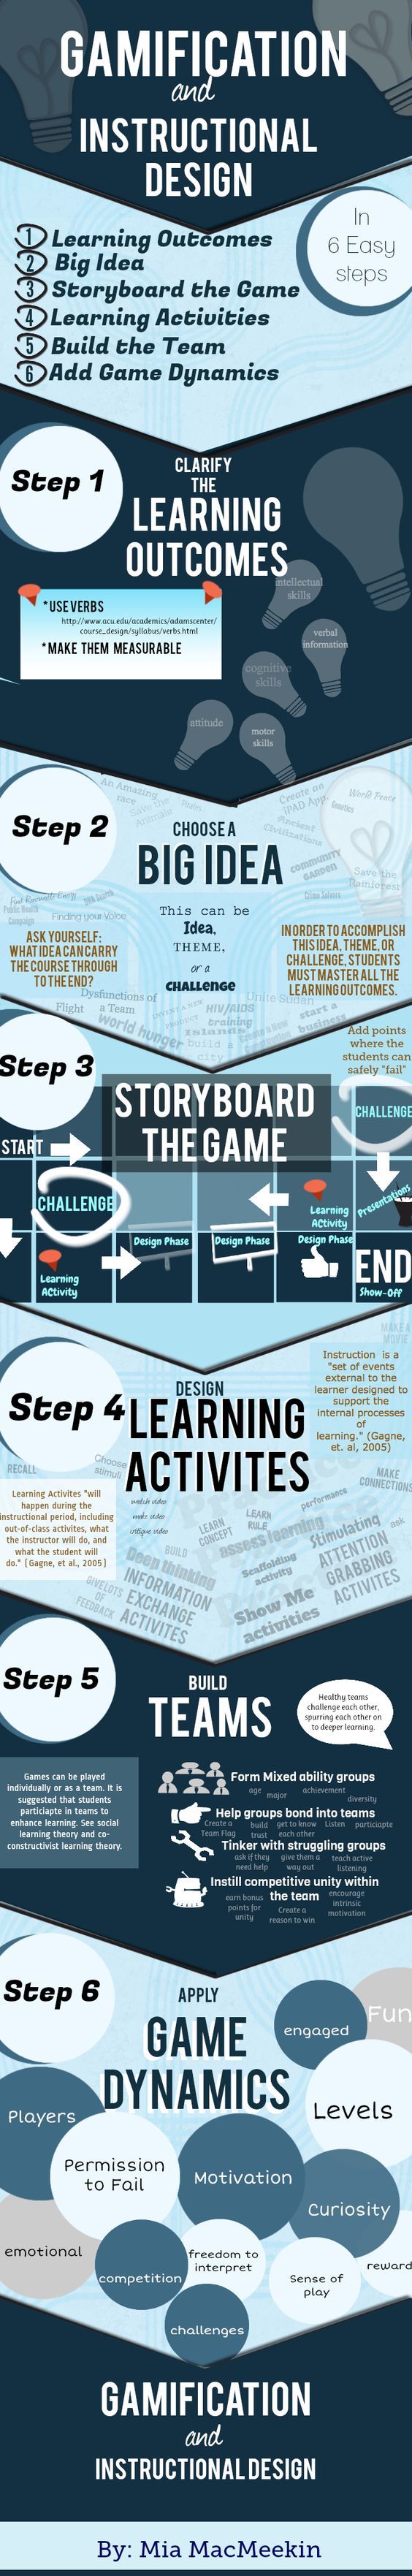 Gamification And Instructional Design In 6 Easy Steps